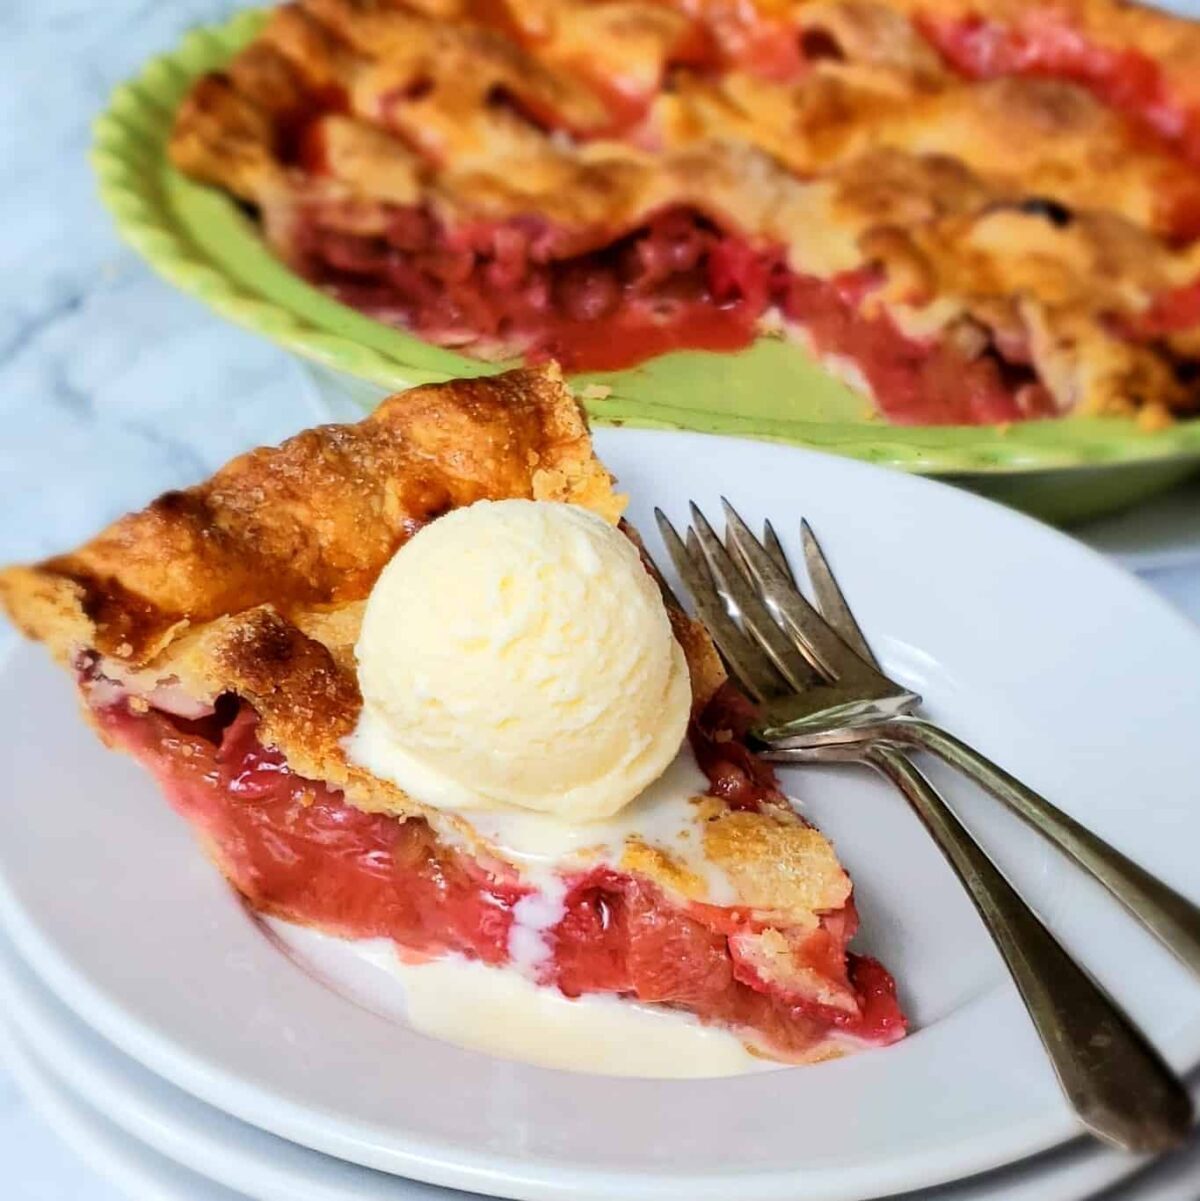 Slice of pie with pink strawberry rhubarb filling and classic pastry crust topped with a round scoop of vanilla ice cream.